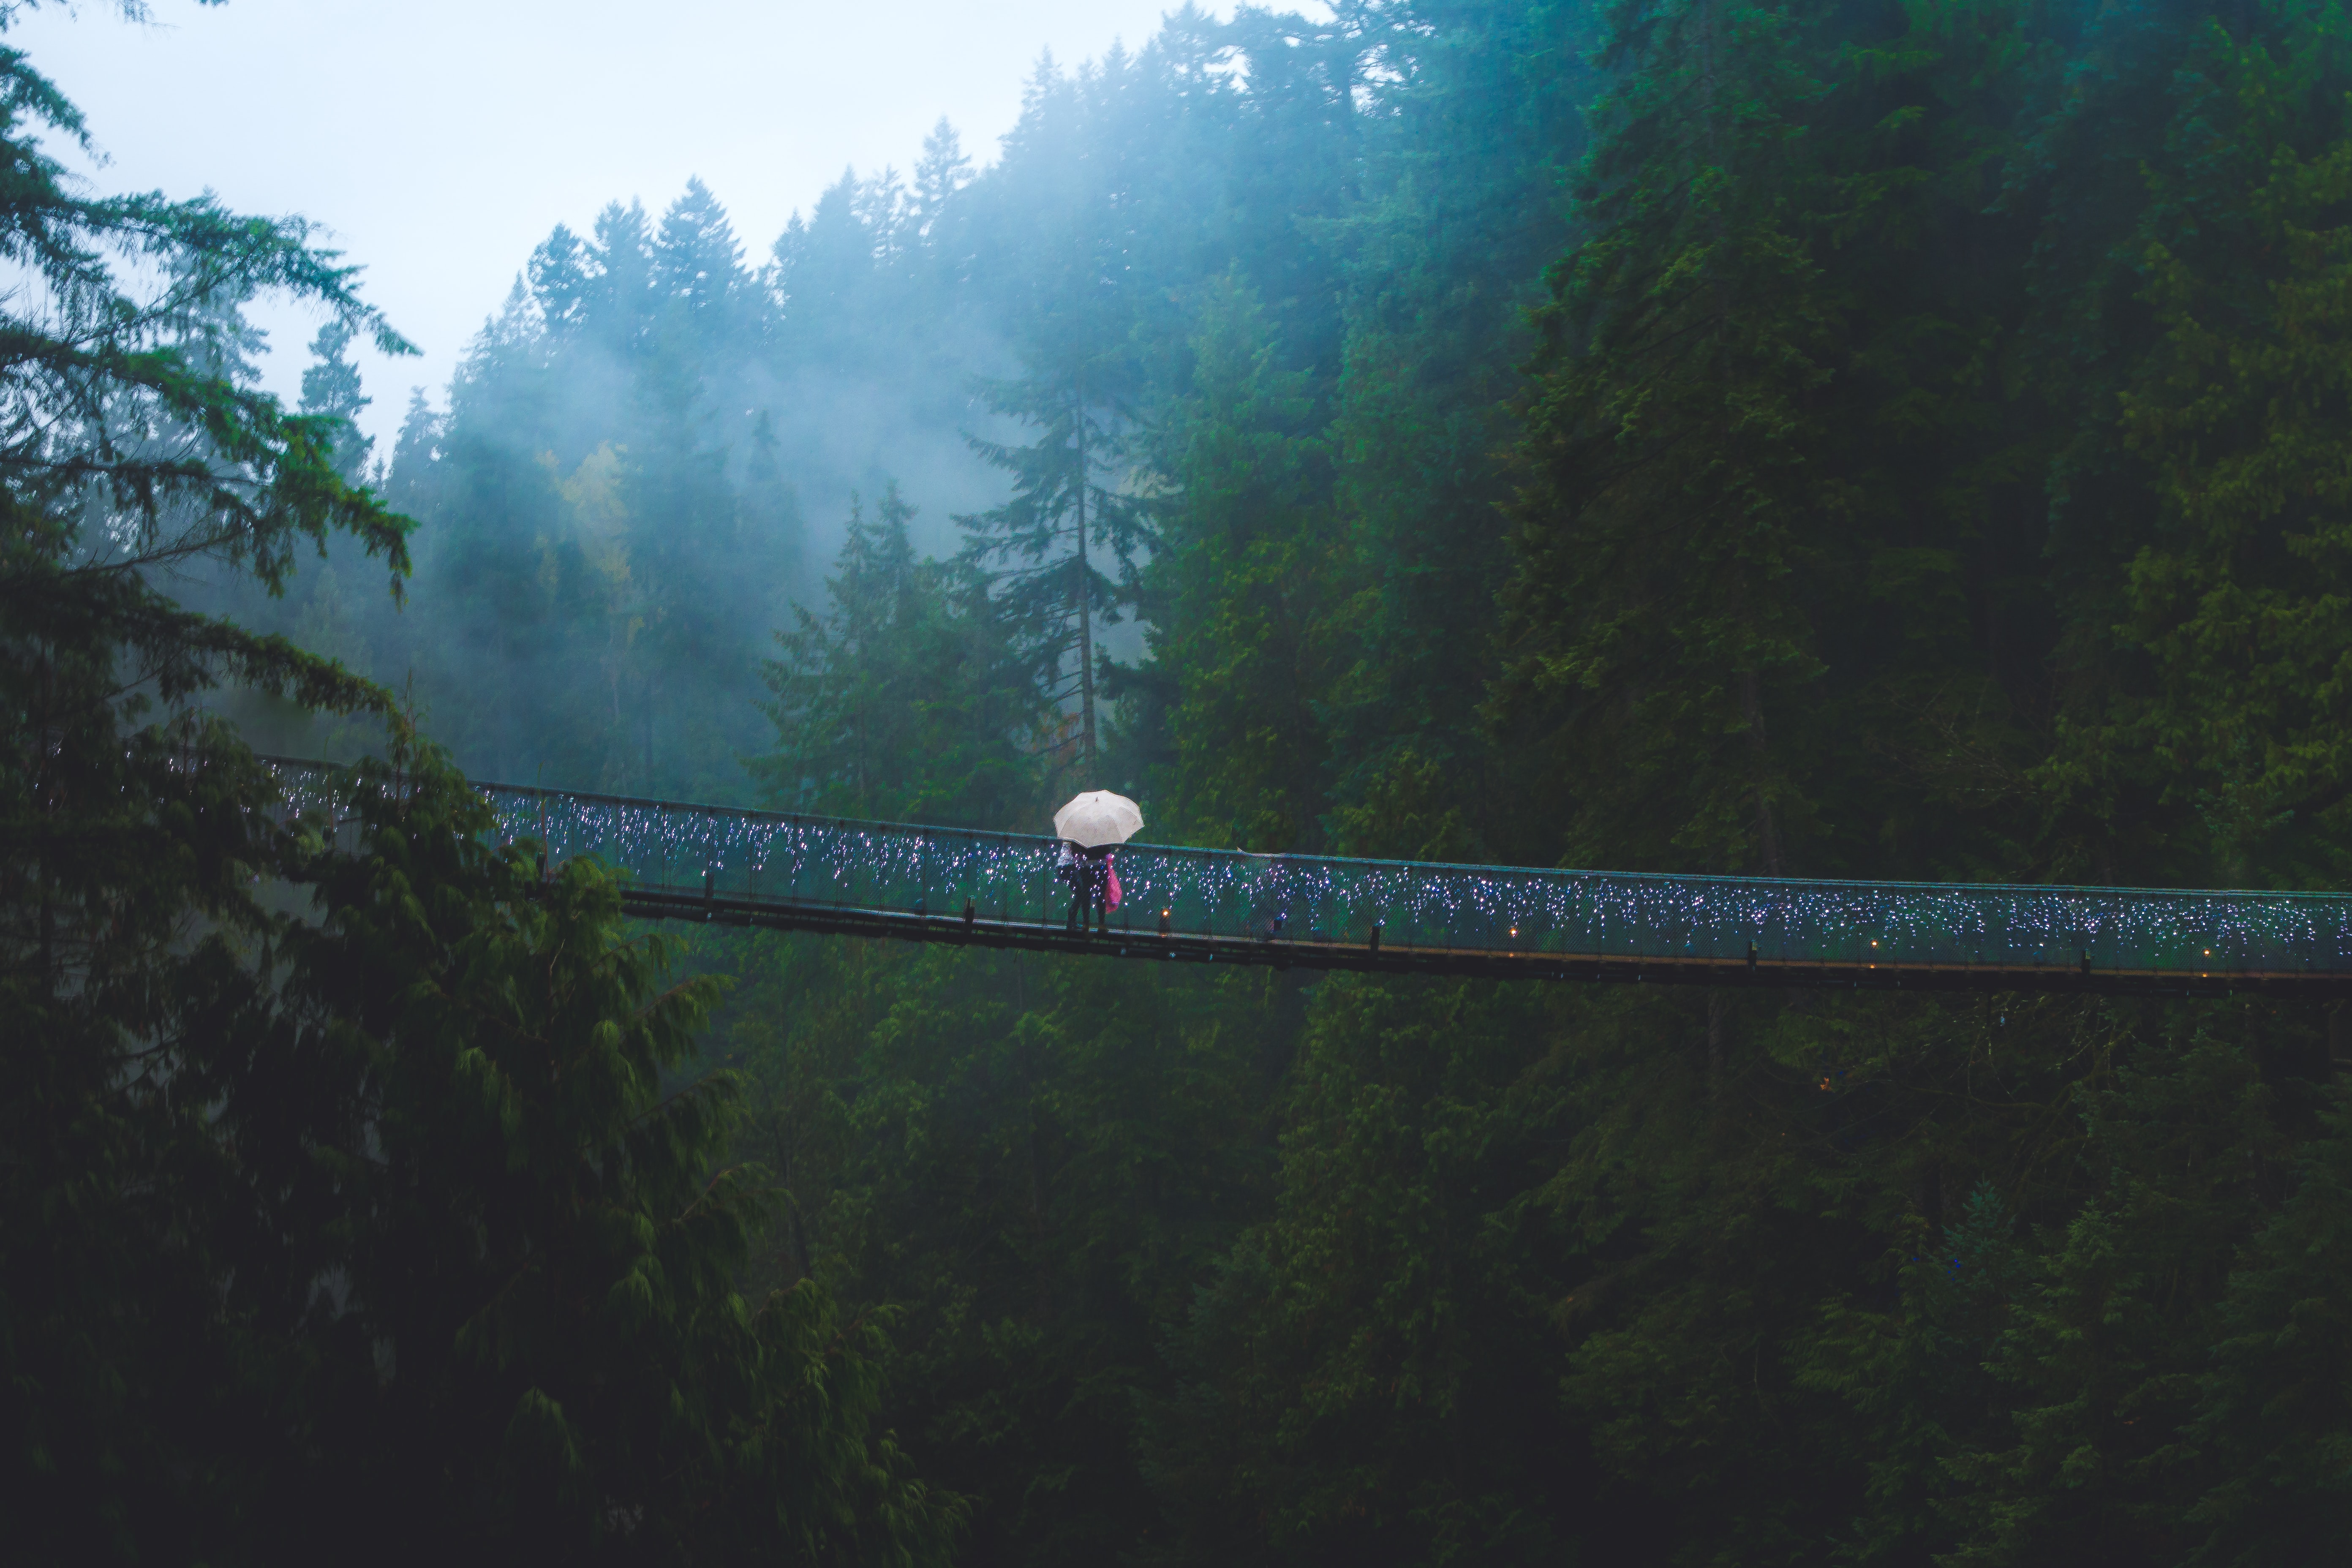 Suspension bridge over lush forest on a rainy and foggy day